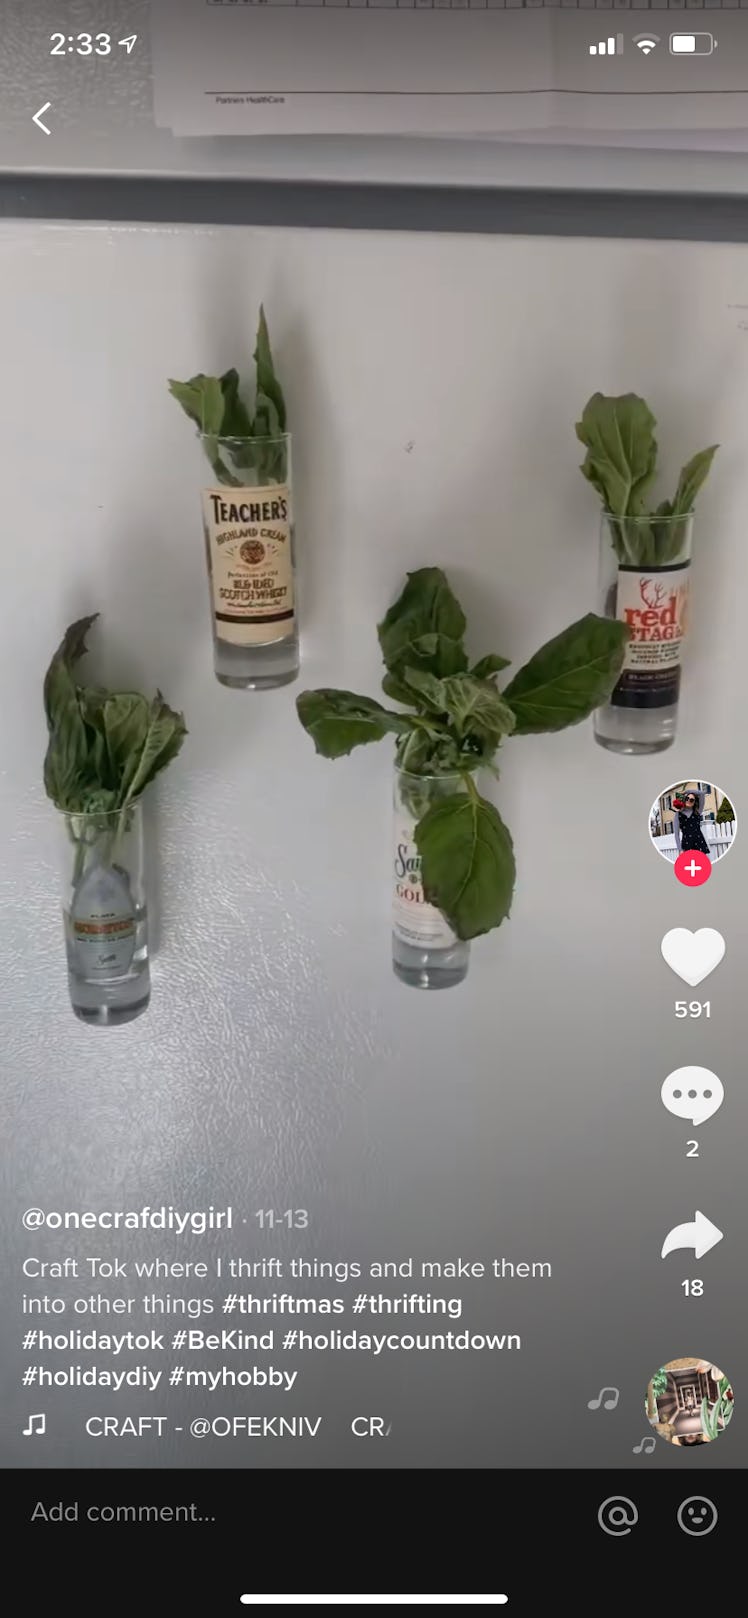 Shot glasses are turned into a magnetic garden in a thriftmas video on TikTok.